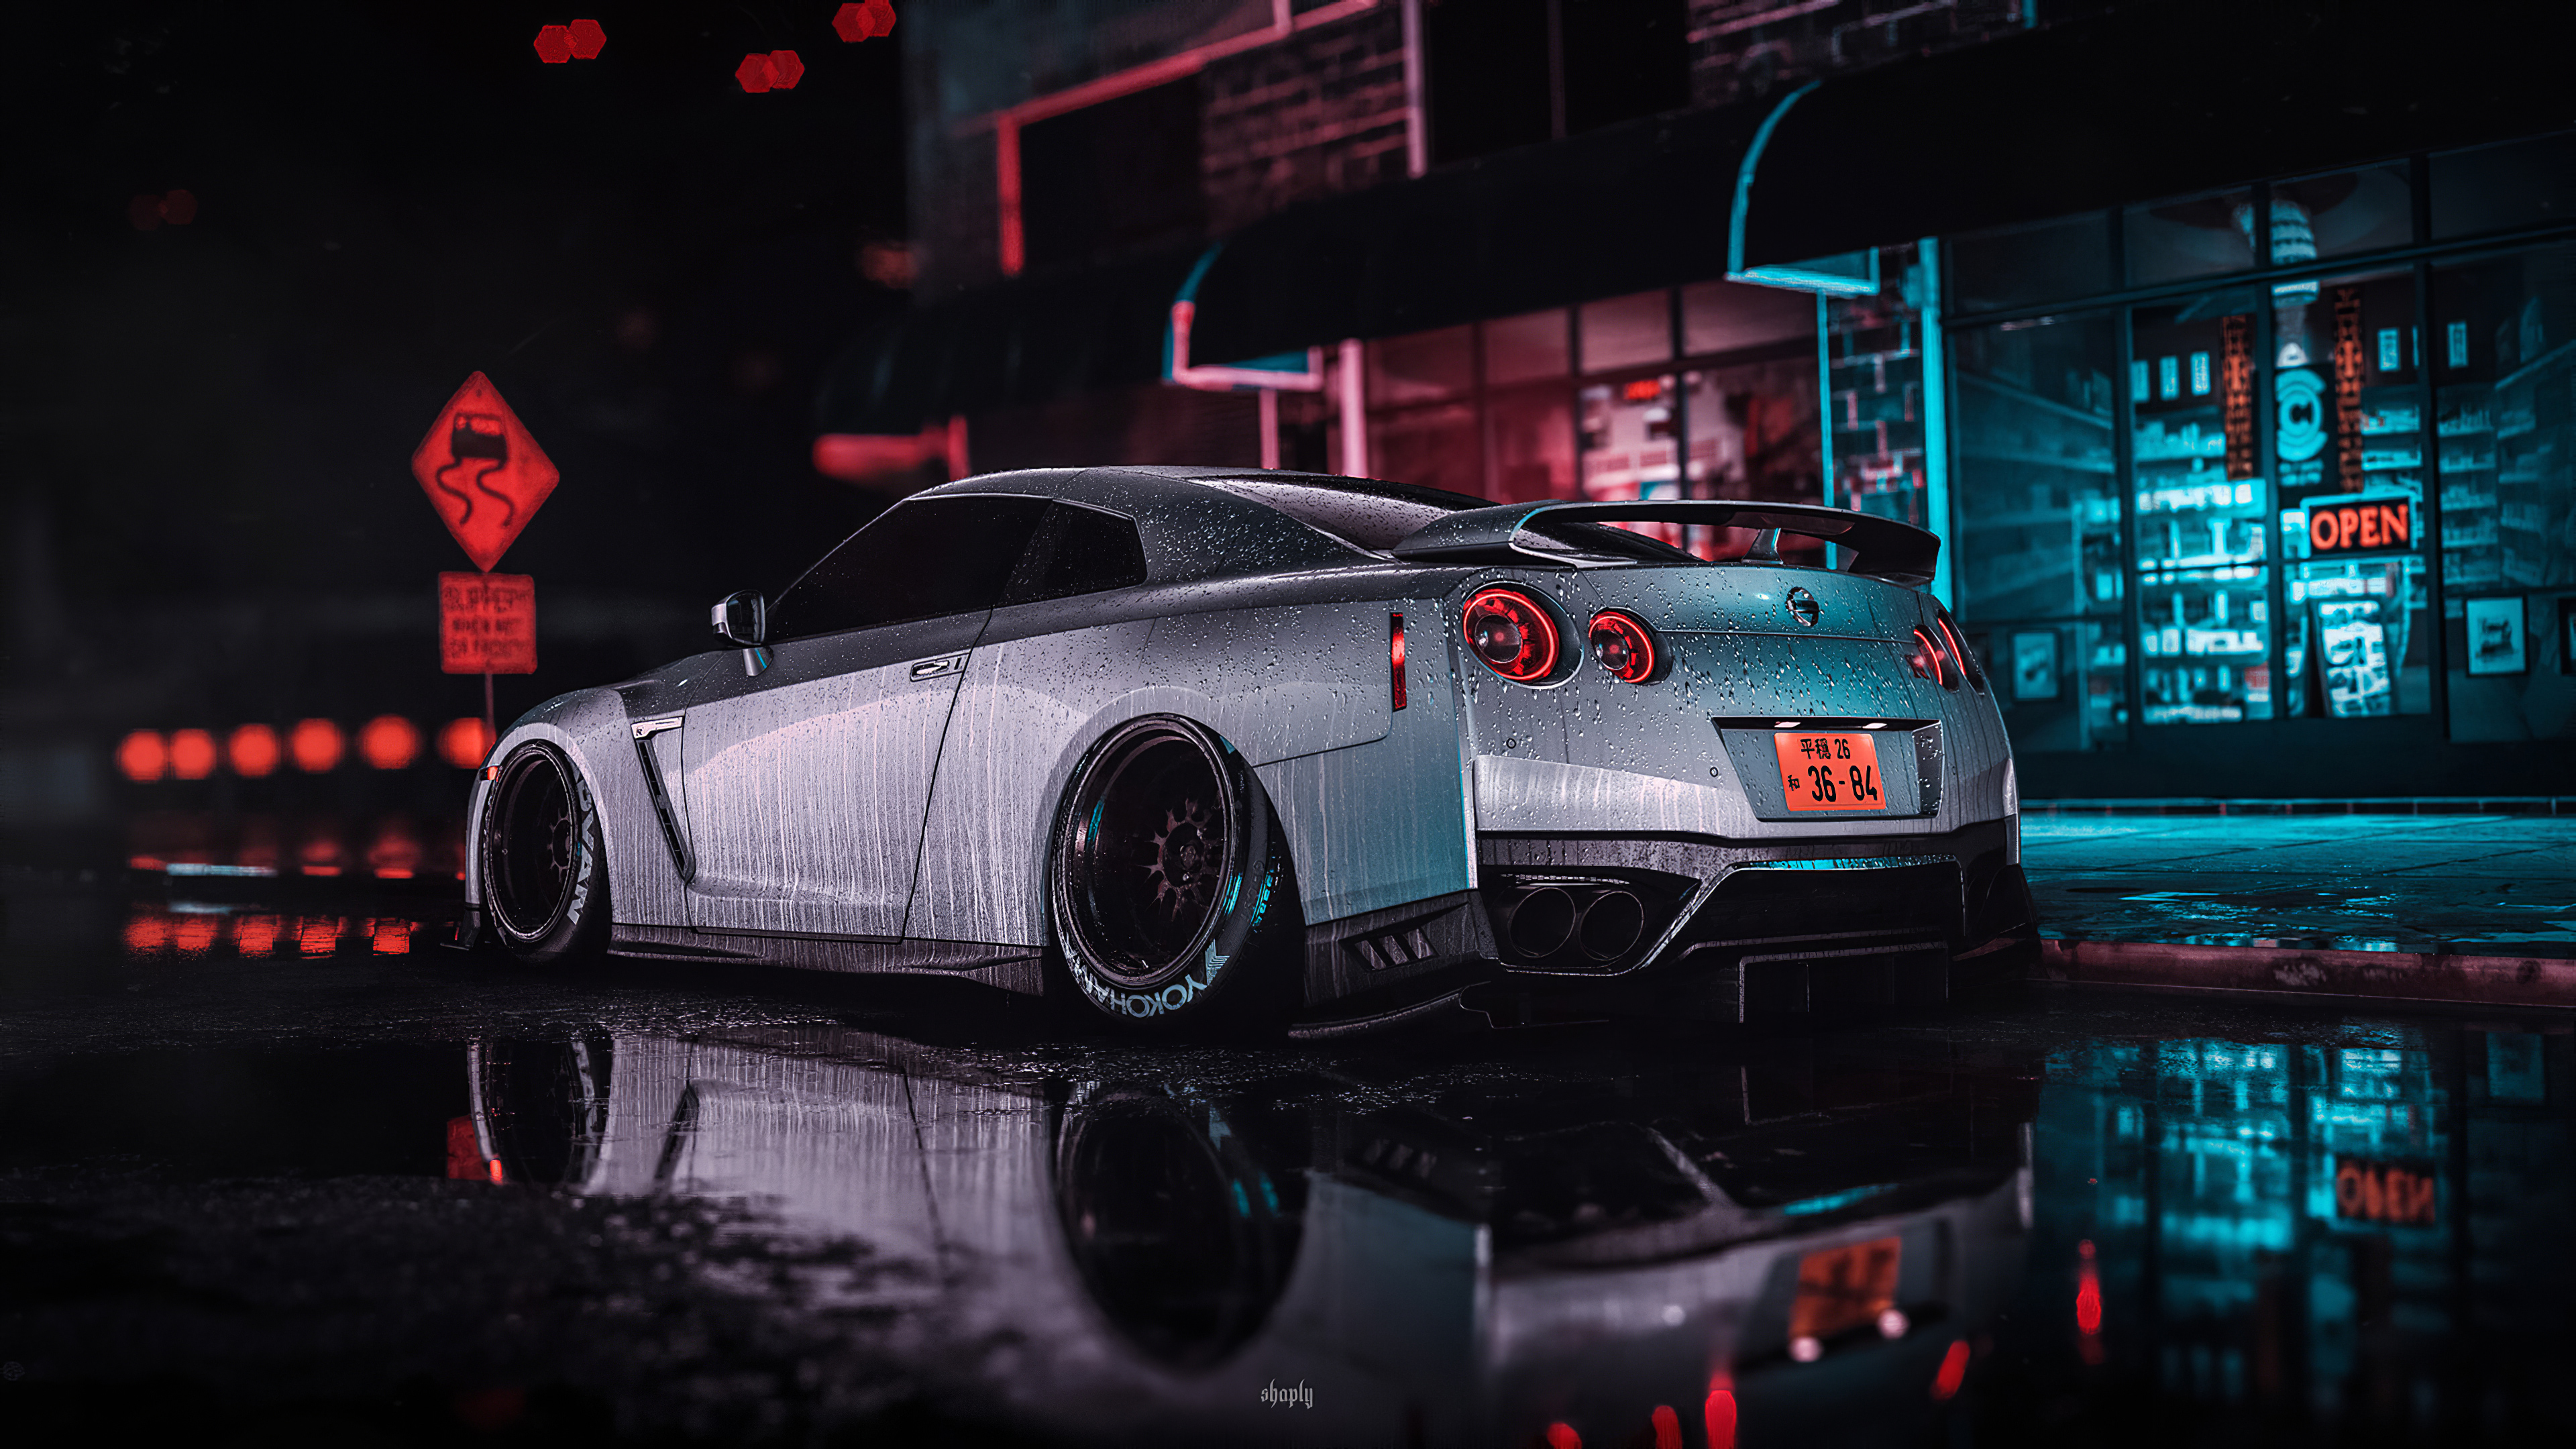 Free photo White Nissan GTR in the rain in Need for Speed game